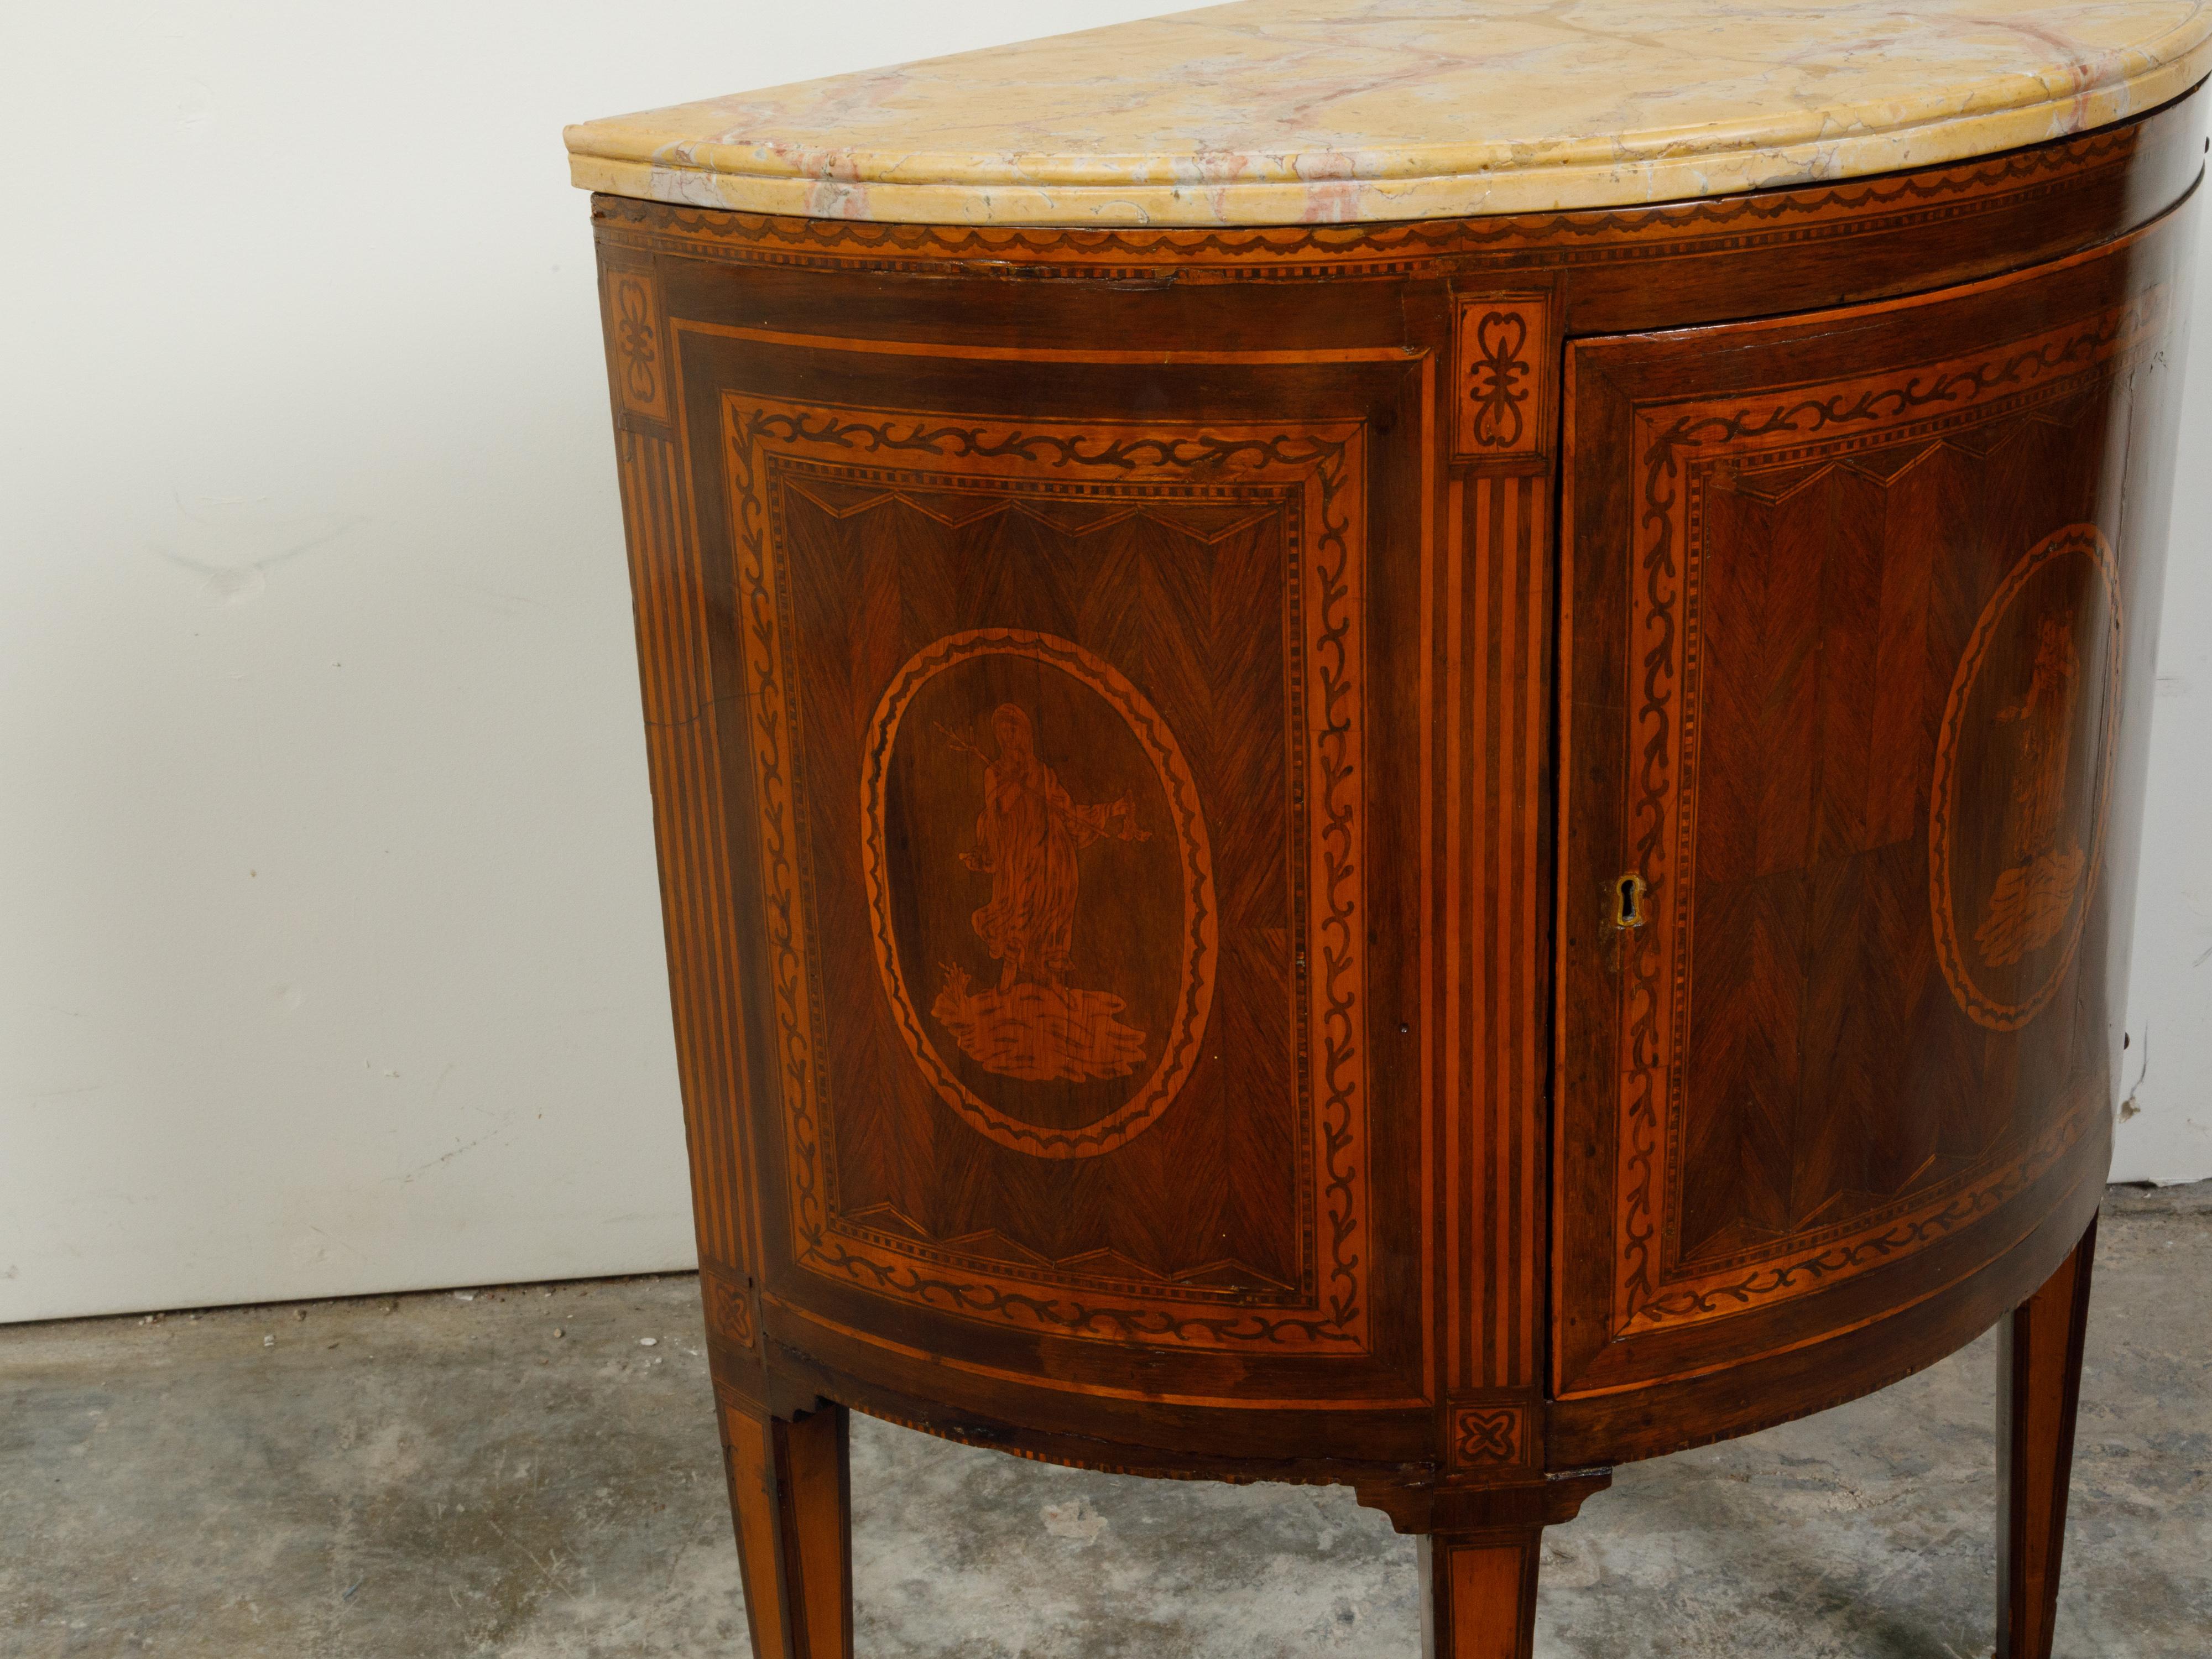 Italian Neoclassical 18th Century Walnut Demilune Cabinet with Marquetry Décor In Good Condition For Sale In Atlanta, GA